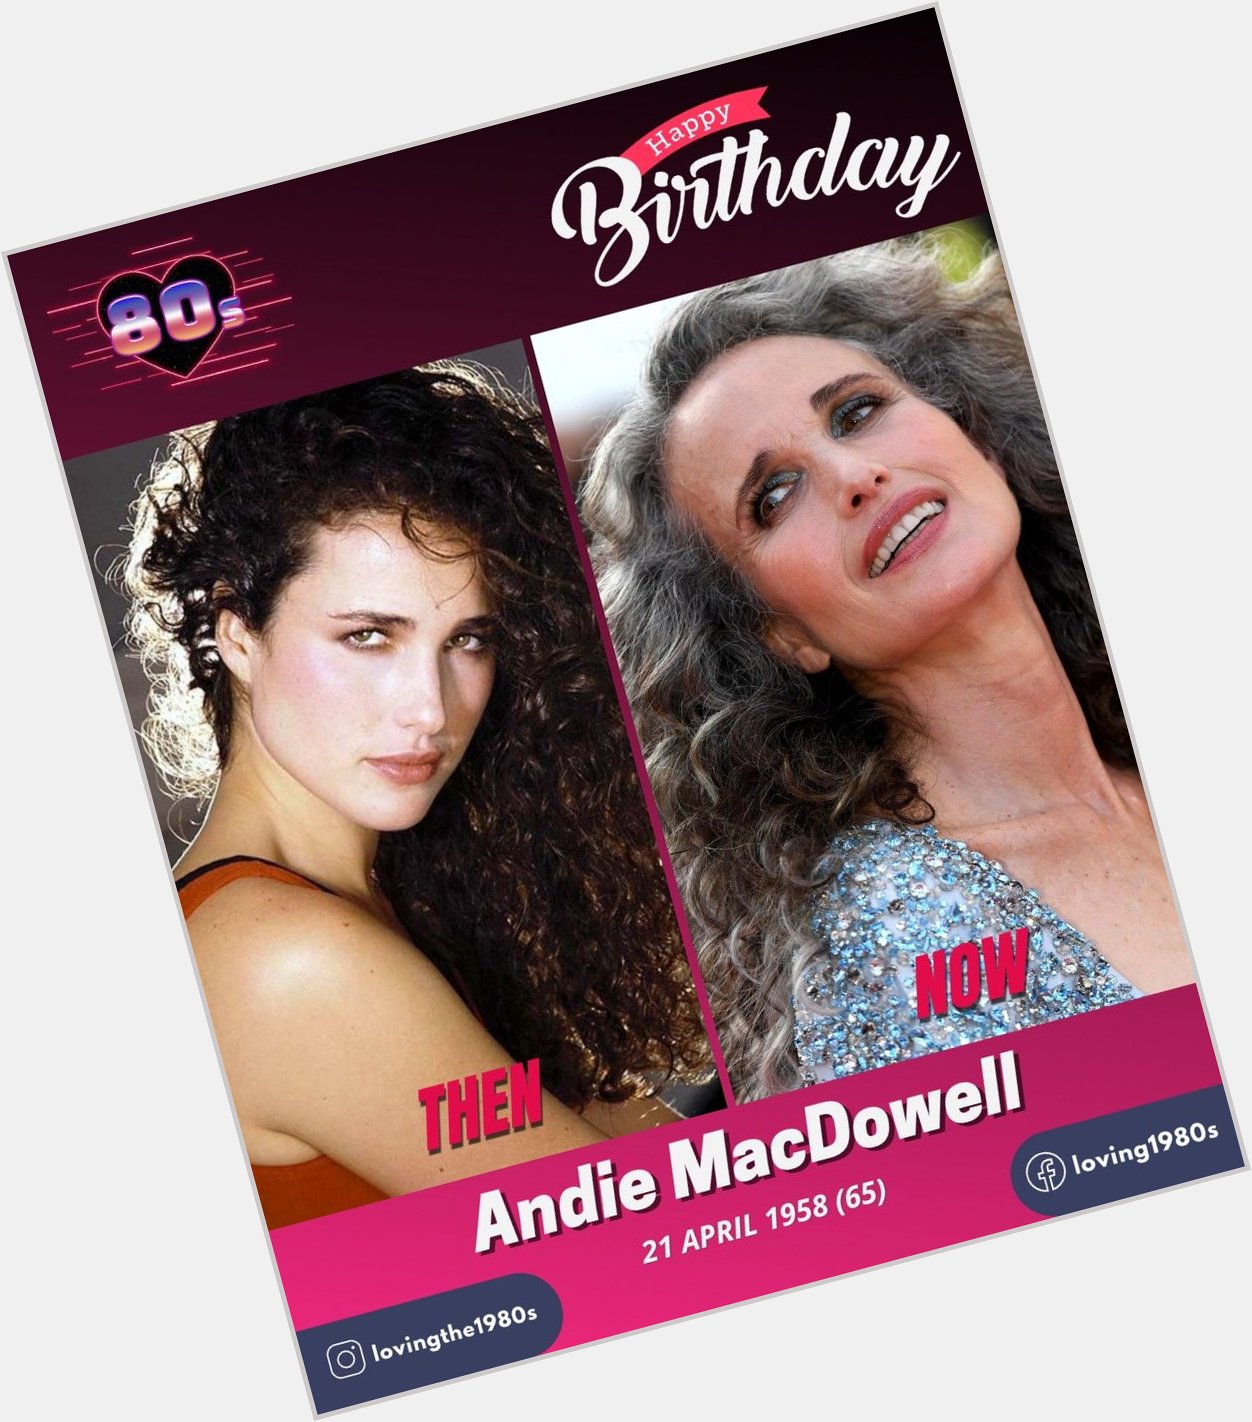 April 21, 1958: Happy birthday to Andie MacDowell, who turns 65 years old today! 